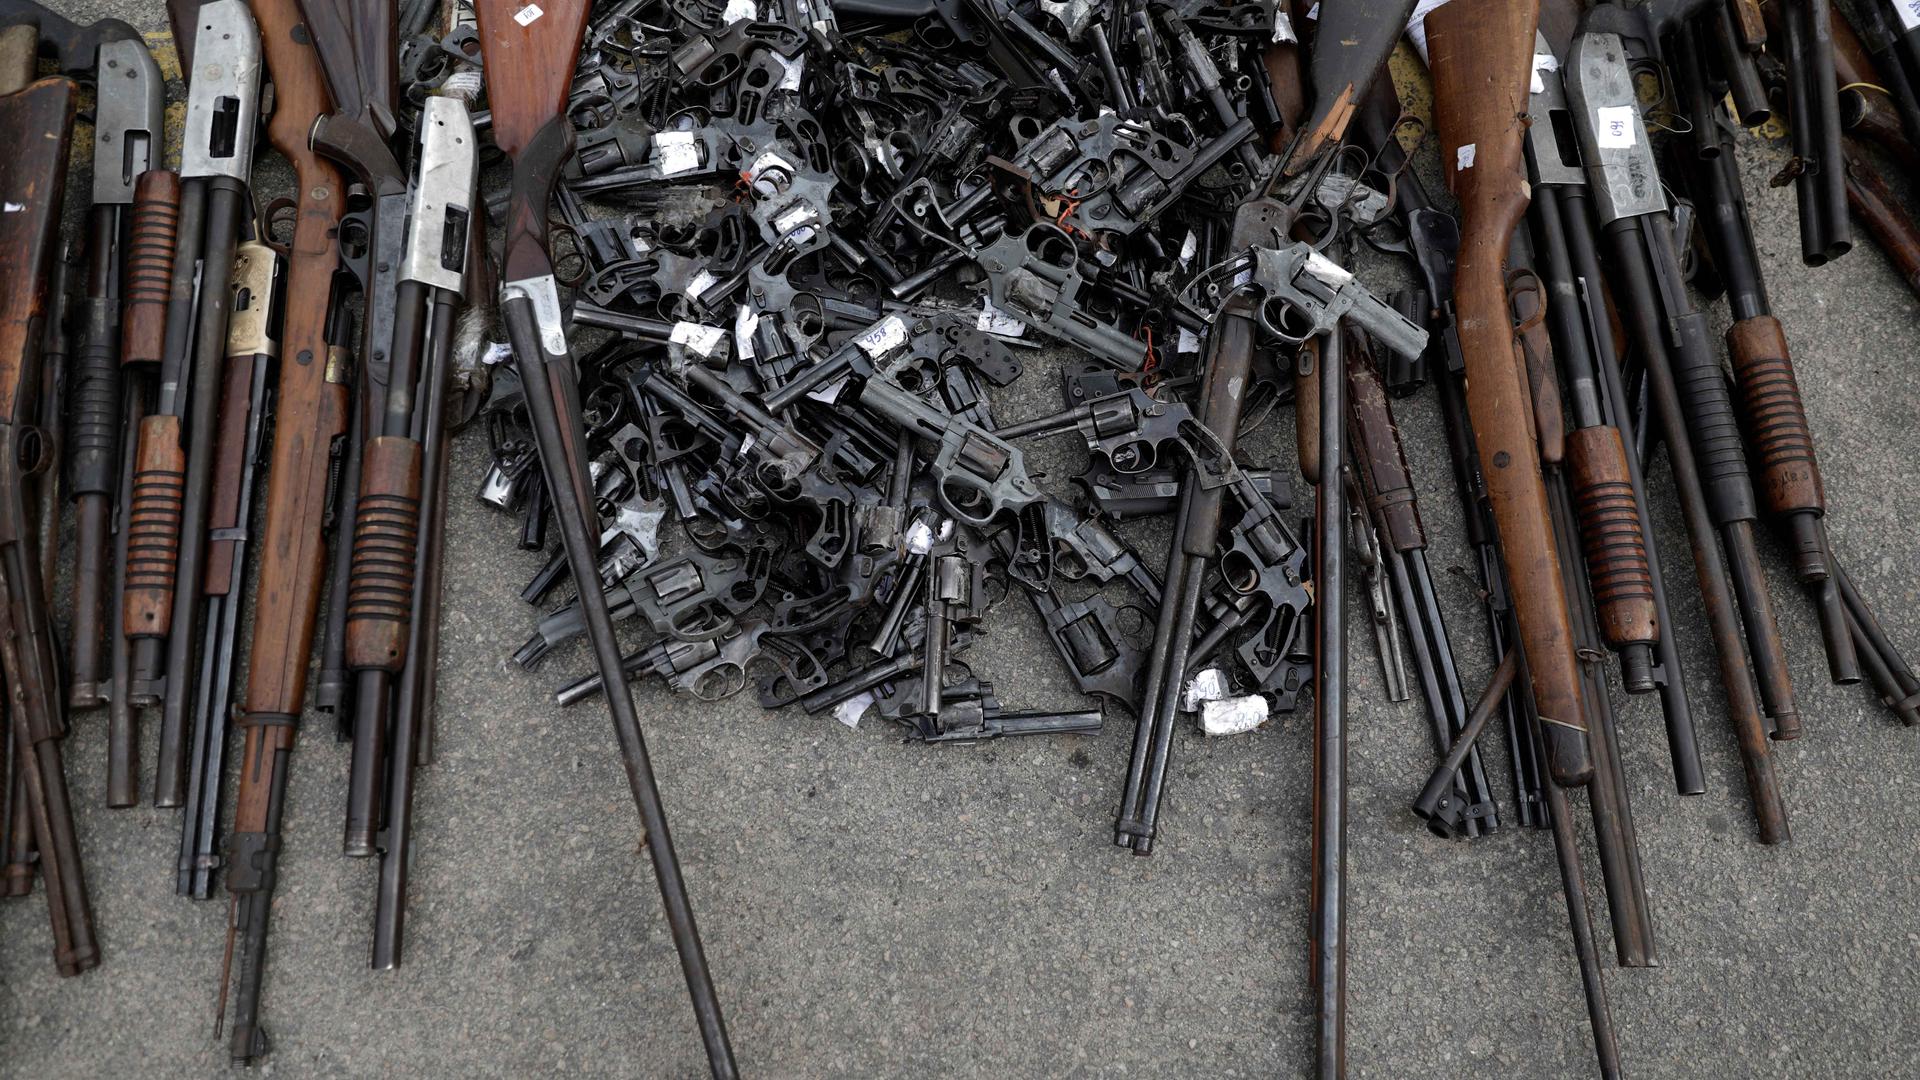 Some of about 4,000 guns seized by Brazil's Federal Police or delivered by residents during a public disarmament campaign, are pictured before being destroyed in Rio de Janeiro on June 2, 2017.